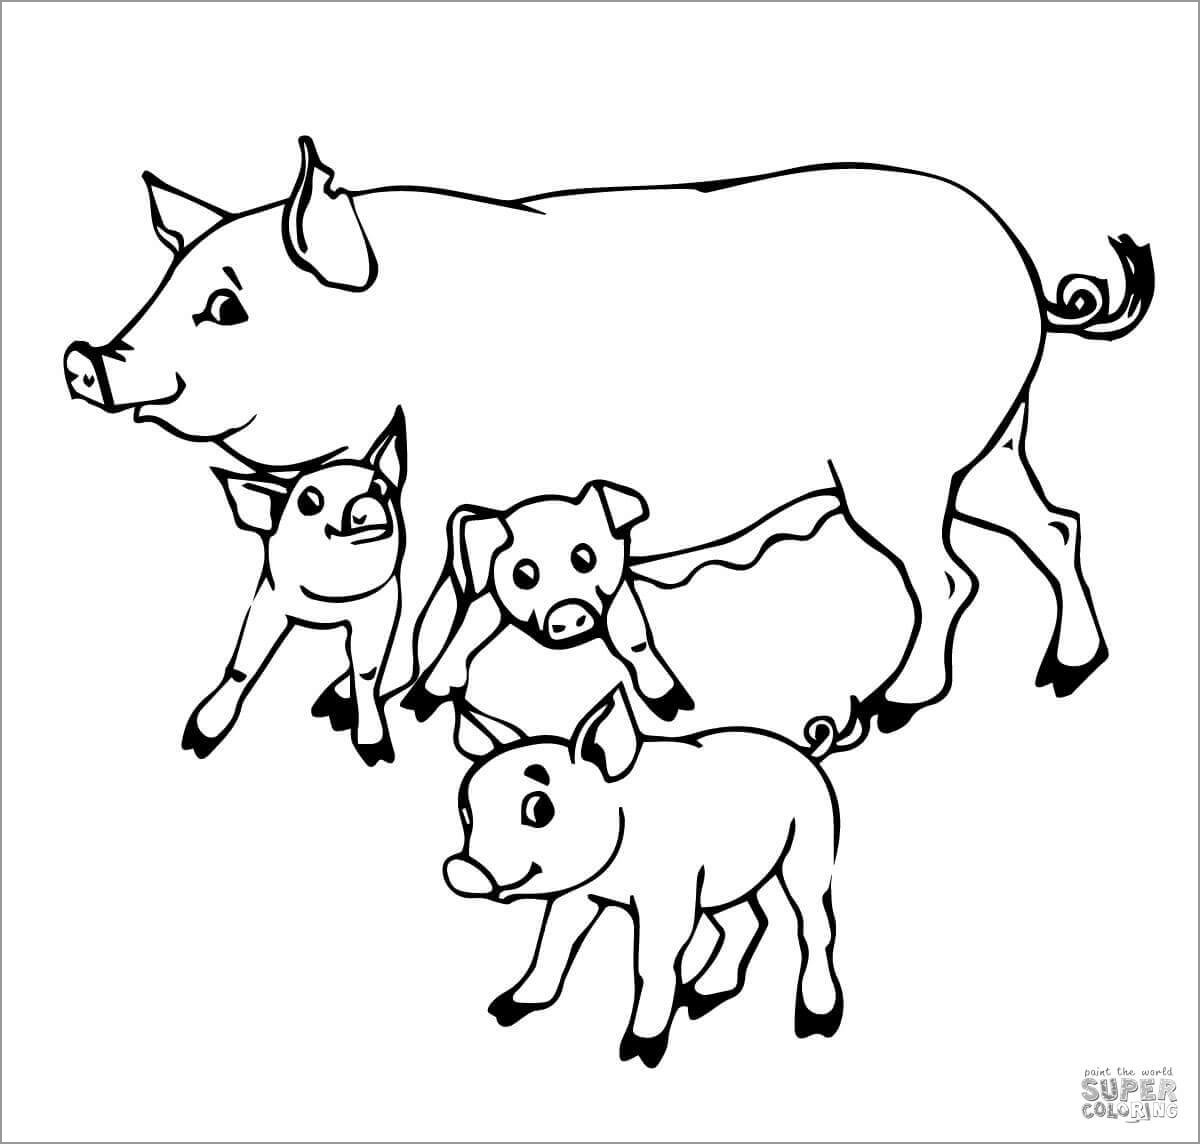 Pig Family Mother and Baby Pigs Coloring Page